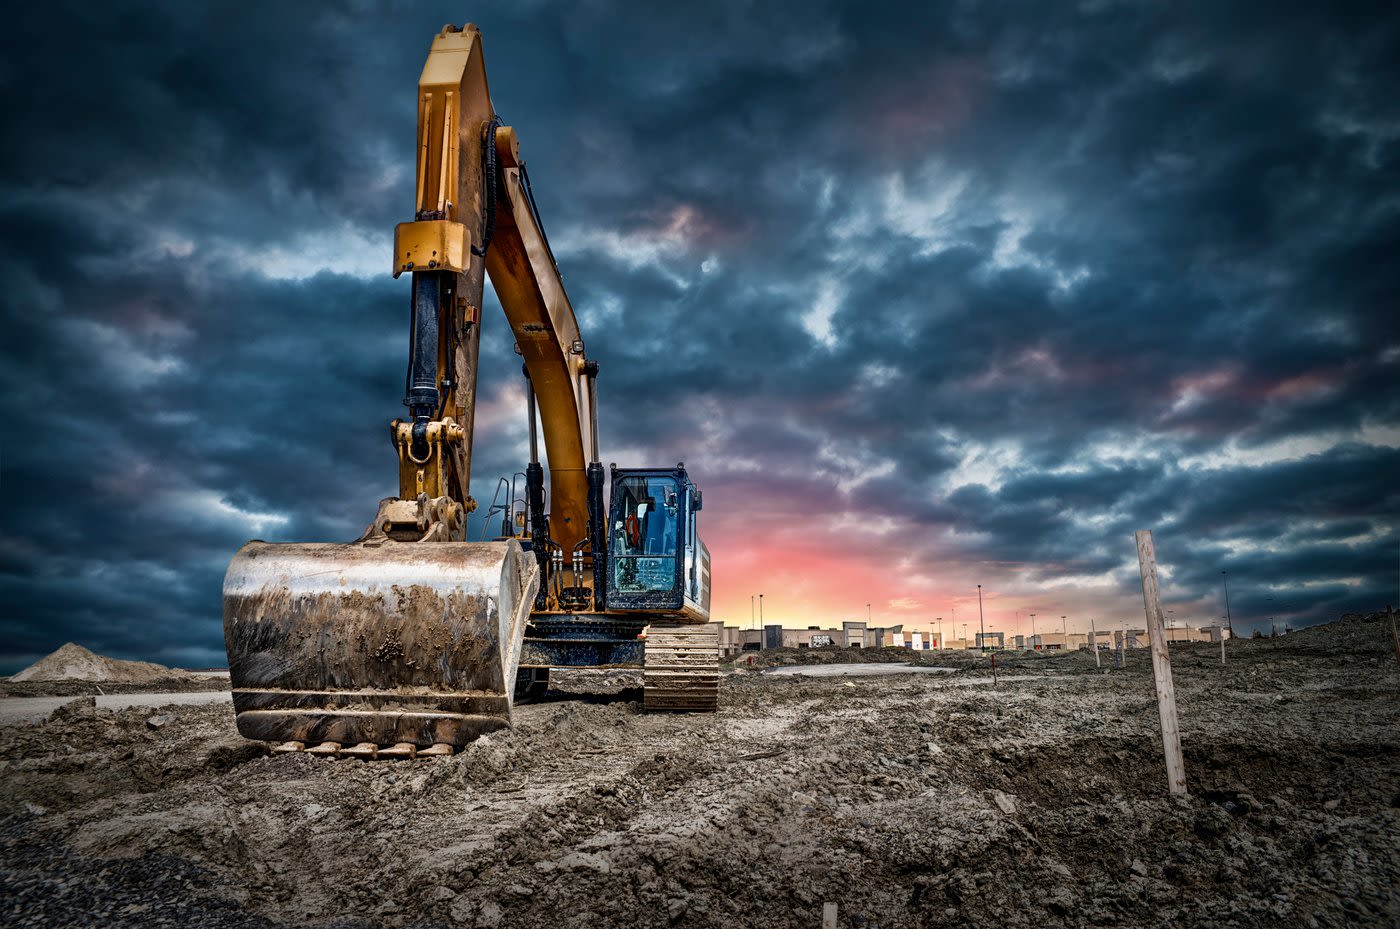 1 Analyst Thinks Caterpillar Stock Is Going to $345. Is It a Buy?